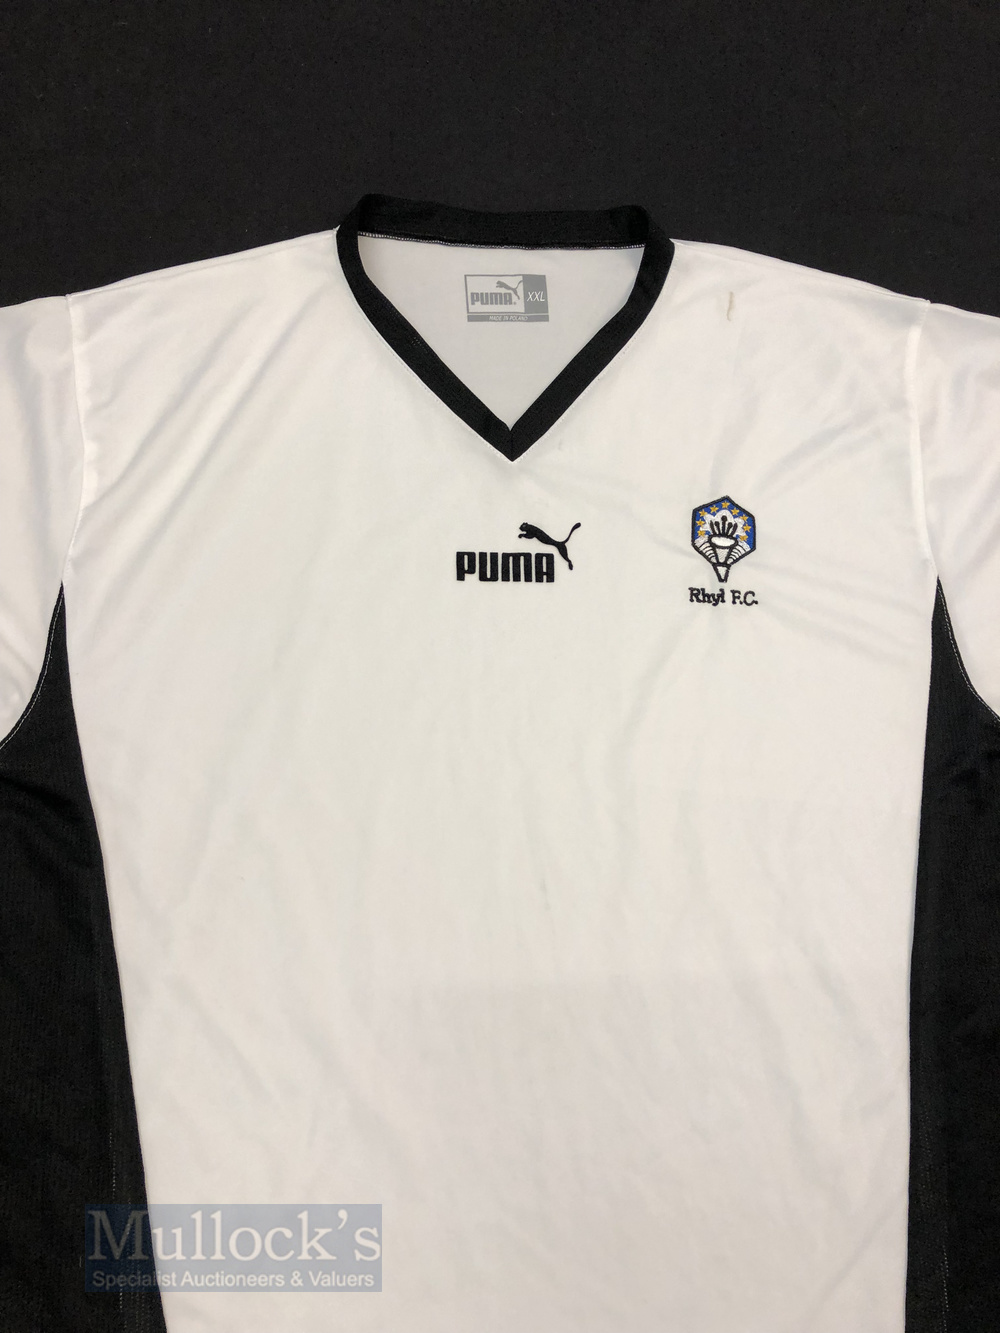 Rhyl FC Home football shirt size XXL in white and black, Puma, long sleeve - Image 2 of 2